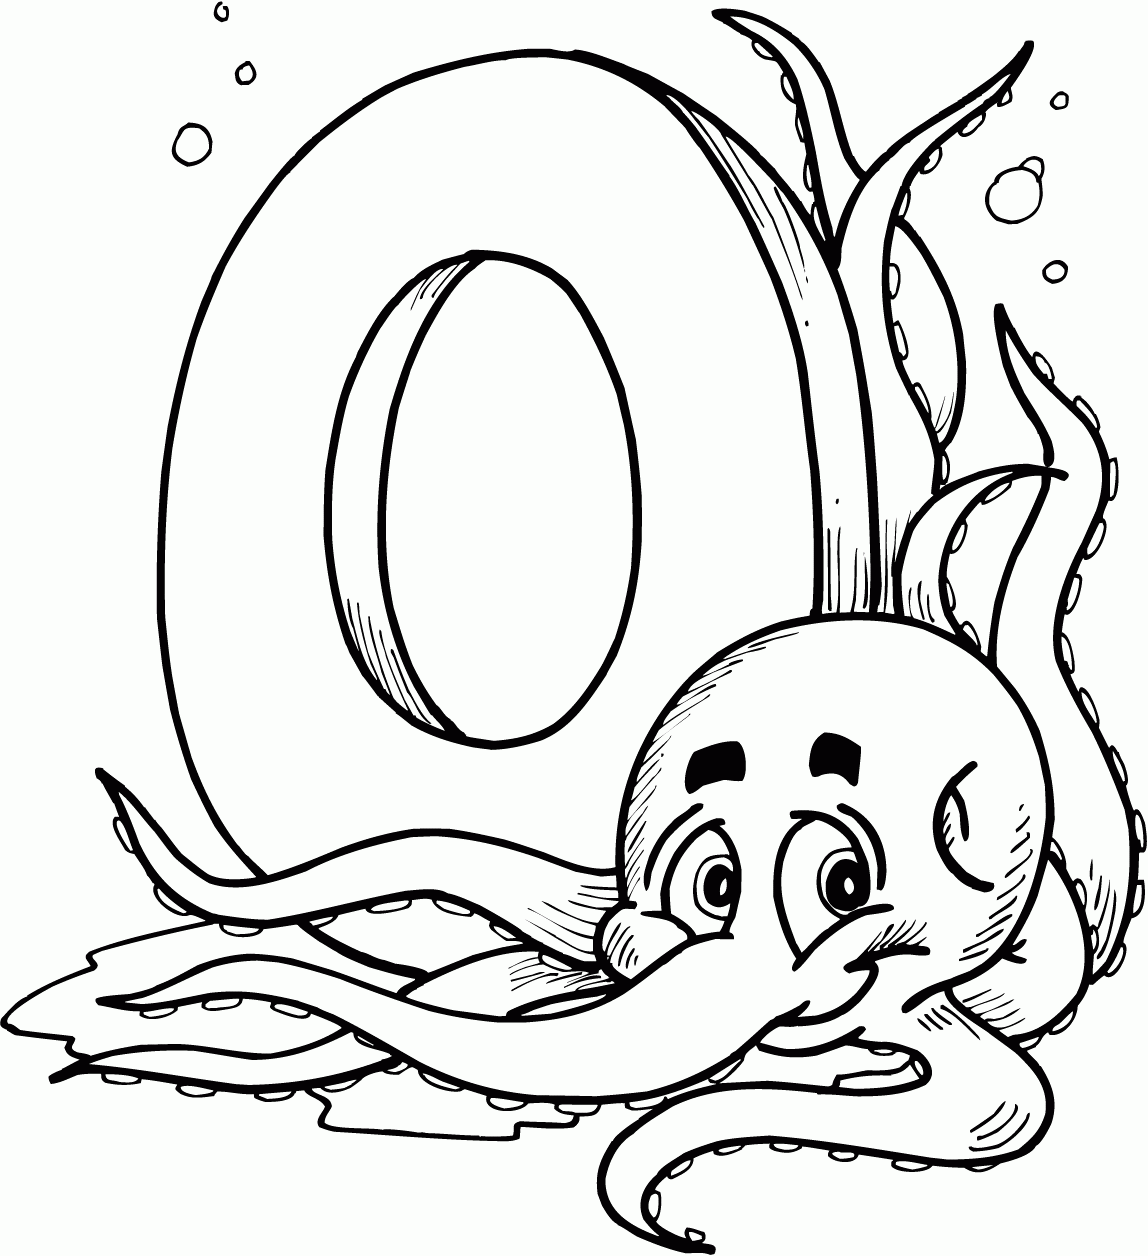 letter o coloring pages printable for kids - Coloring Point